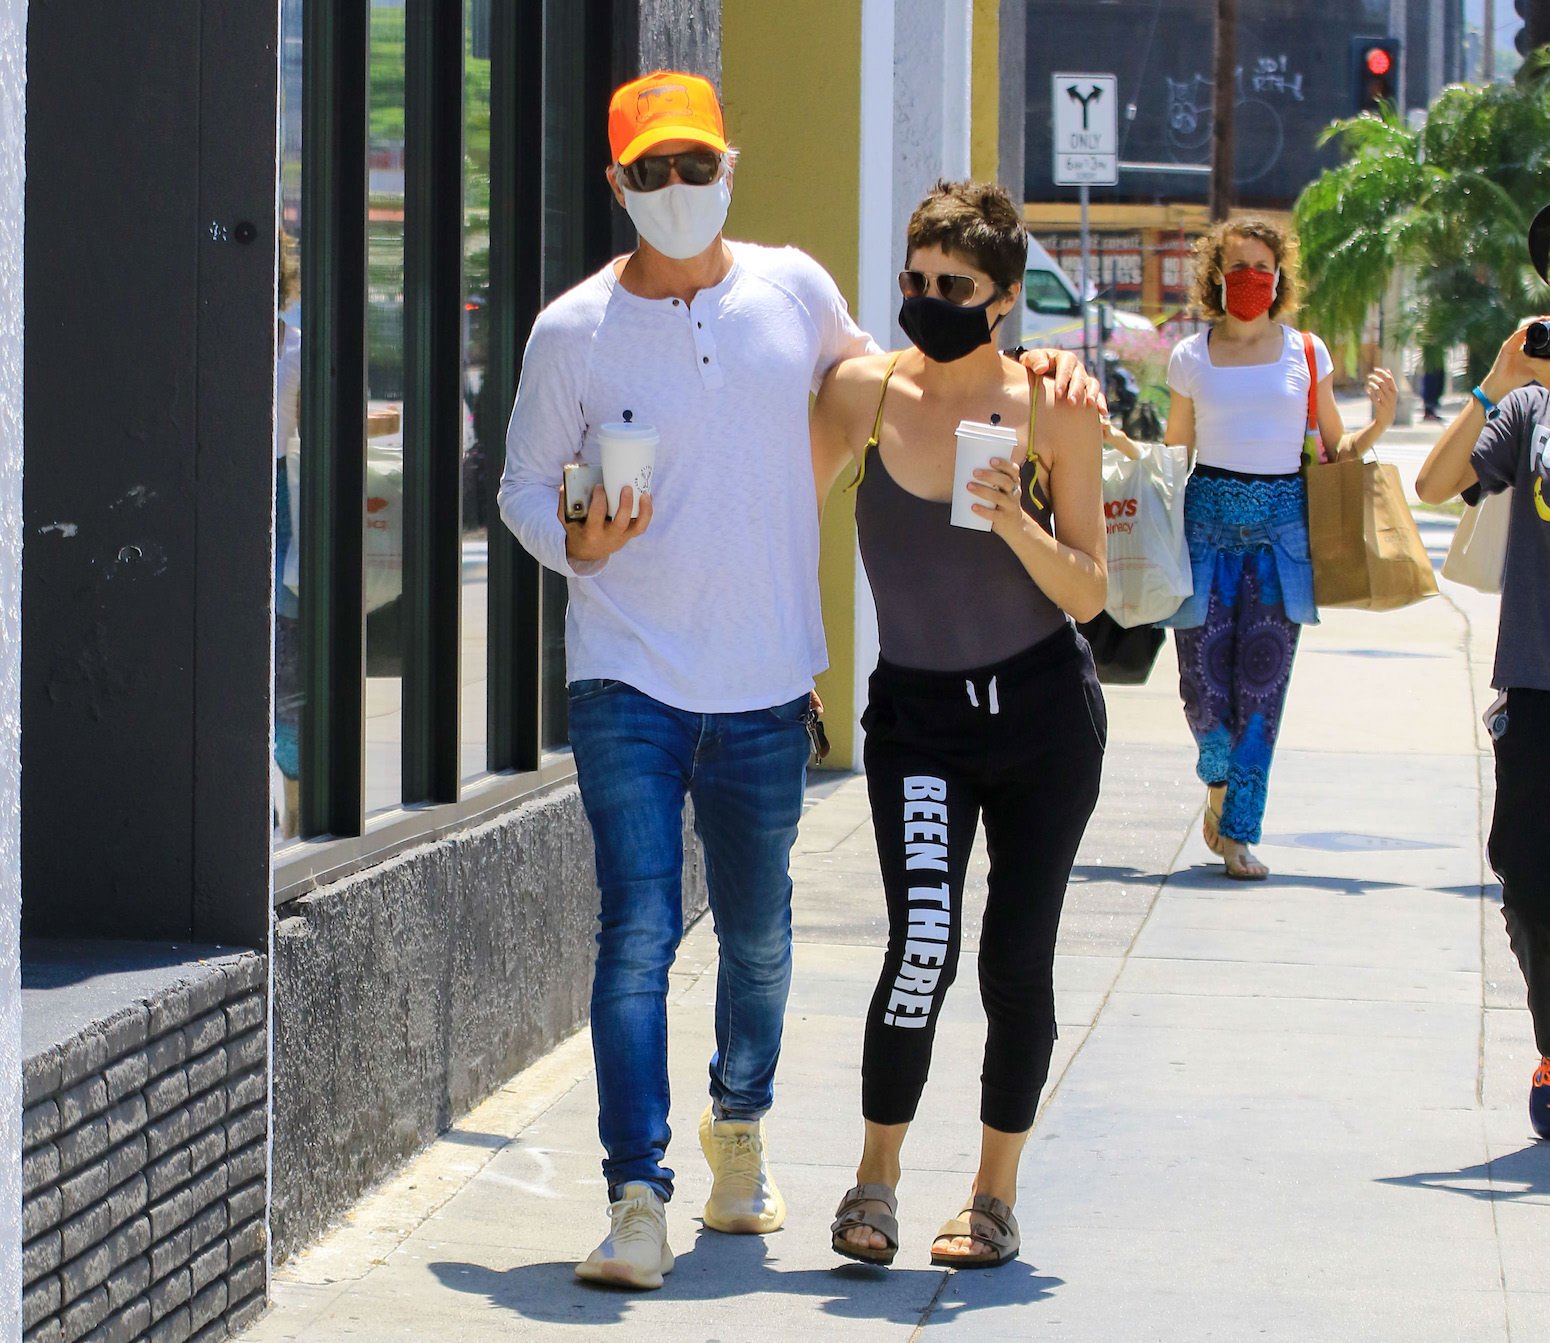 Selma Blair and her boyfriend, Ron Carlson, walking together with masks on 